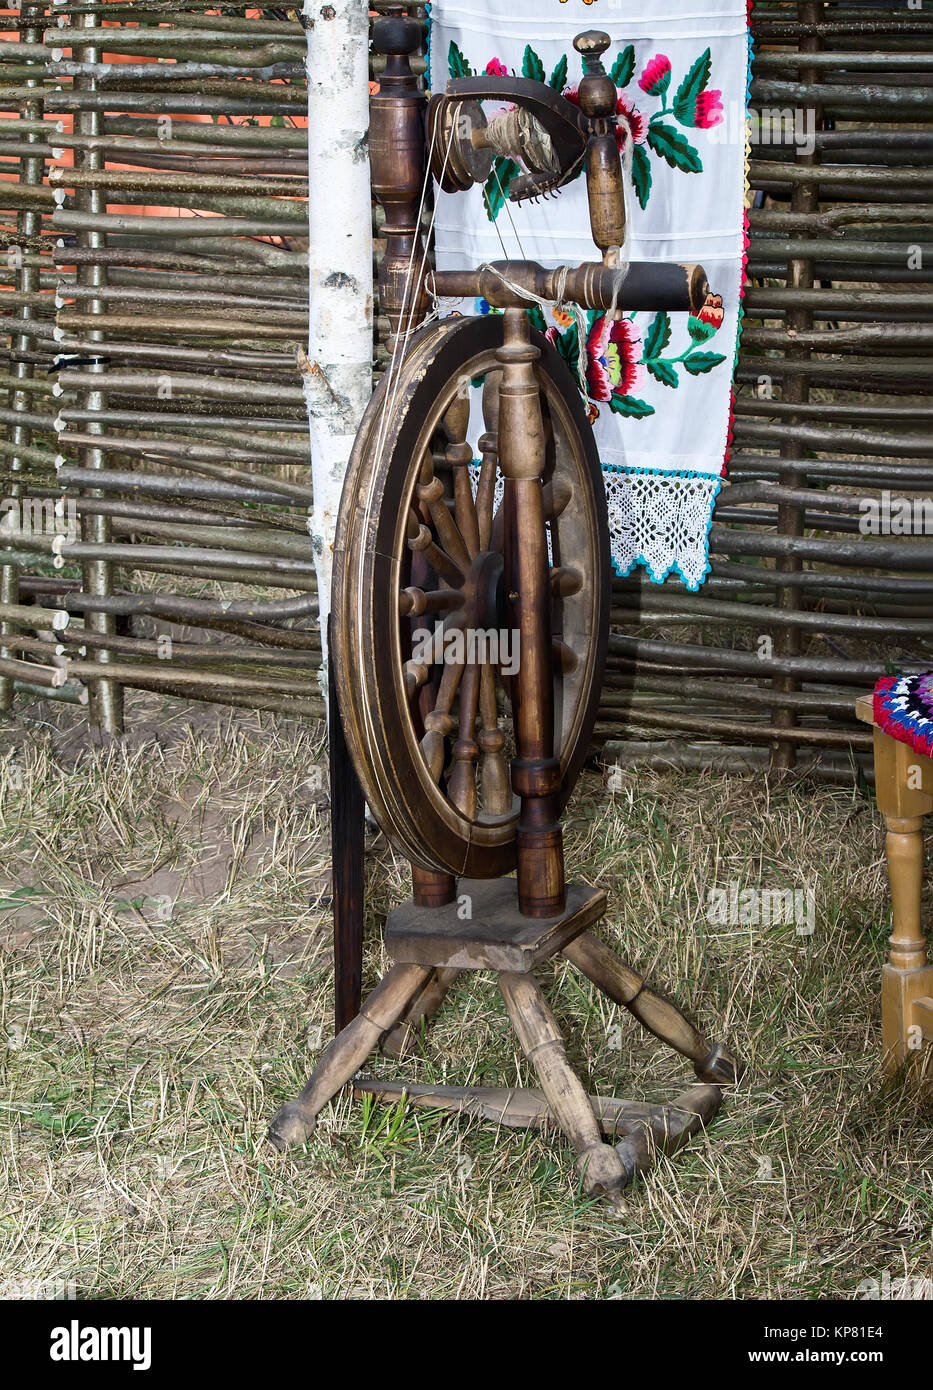 Antique wooden spinning wheel Stock Photo